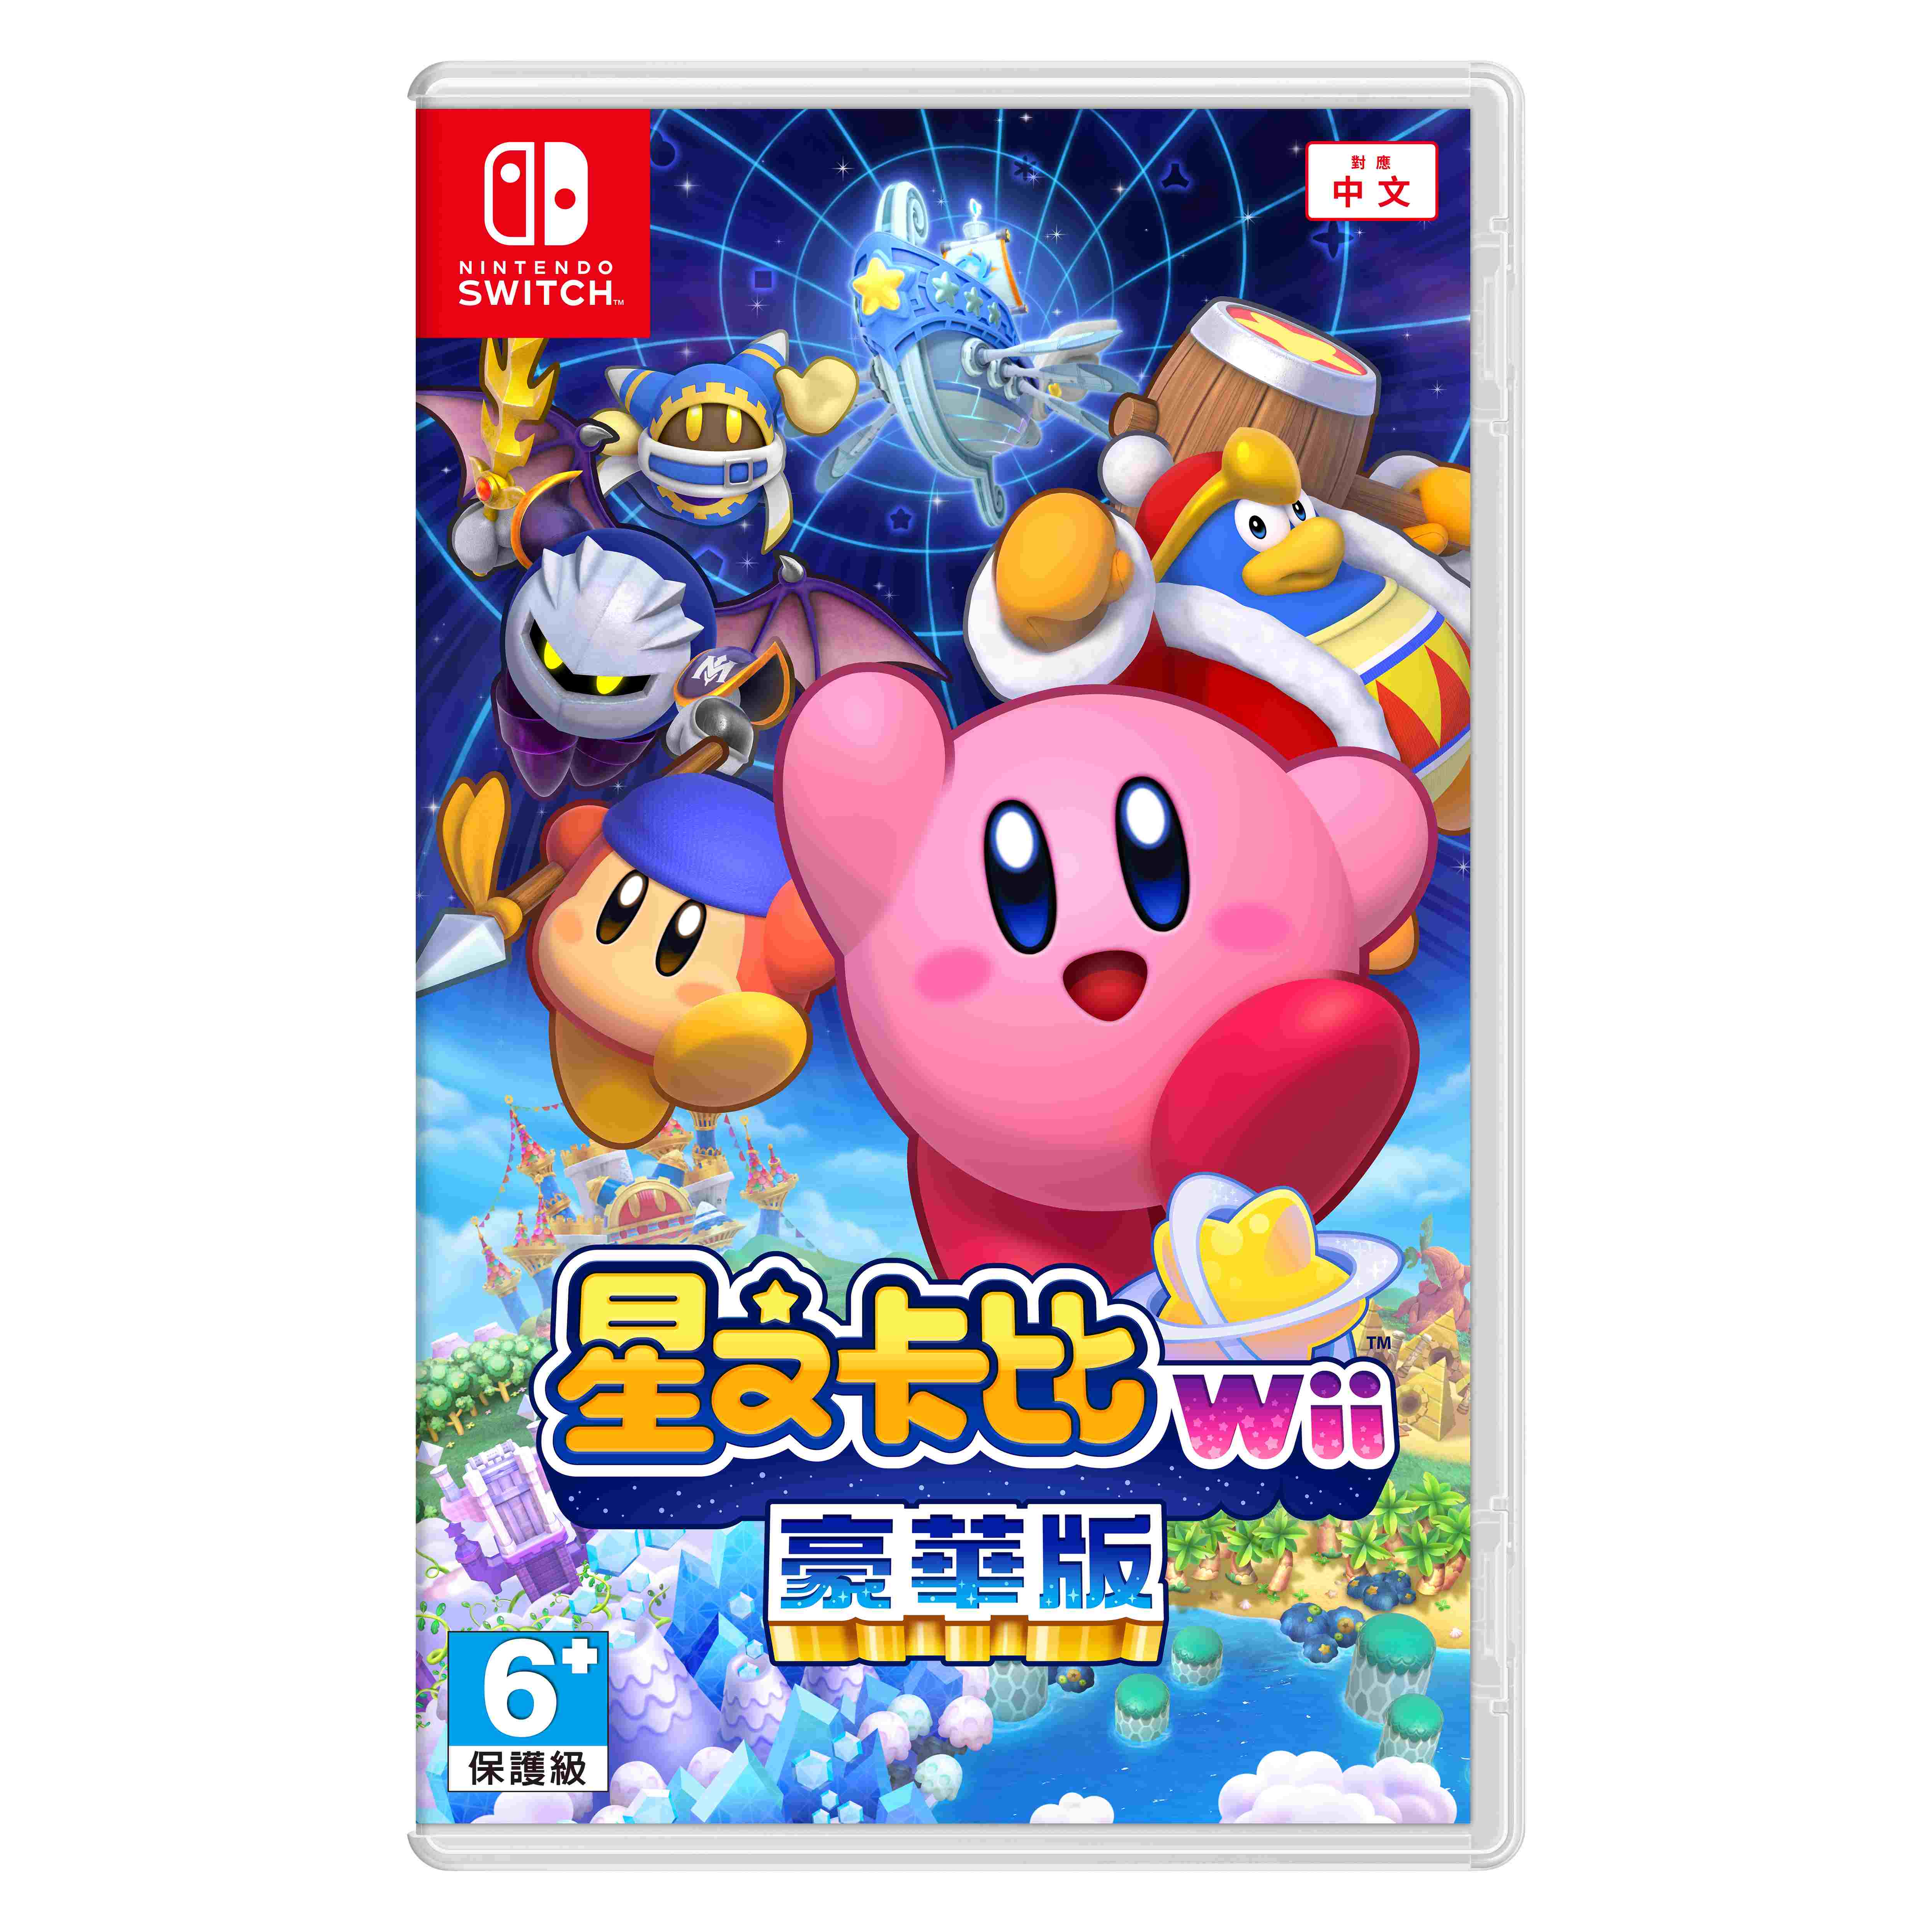 Nintendo Switch Game Software – Kirby's Return to Dream Land